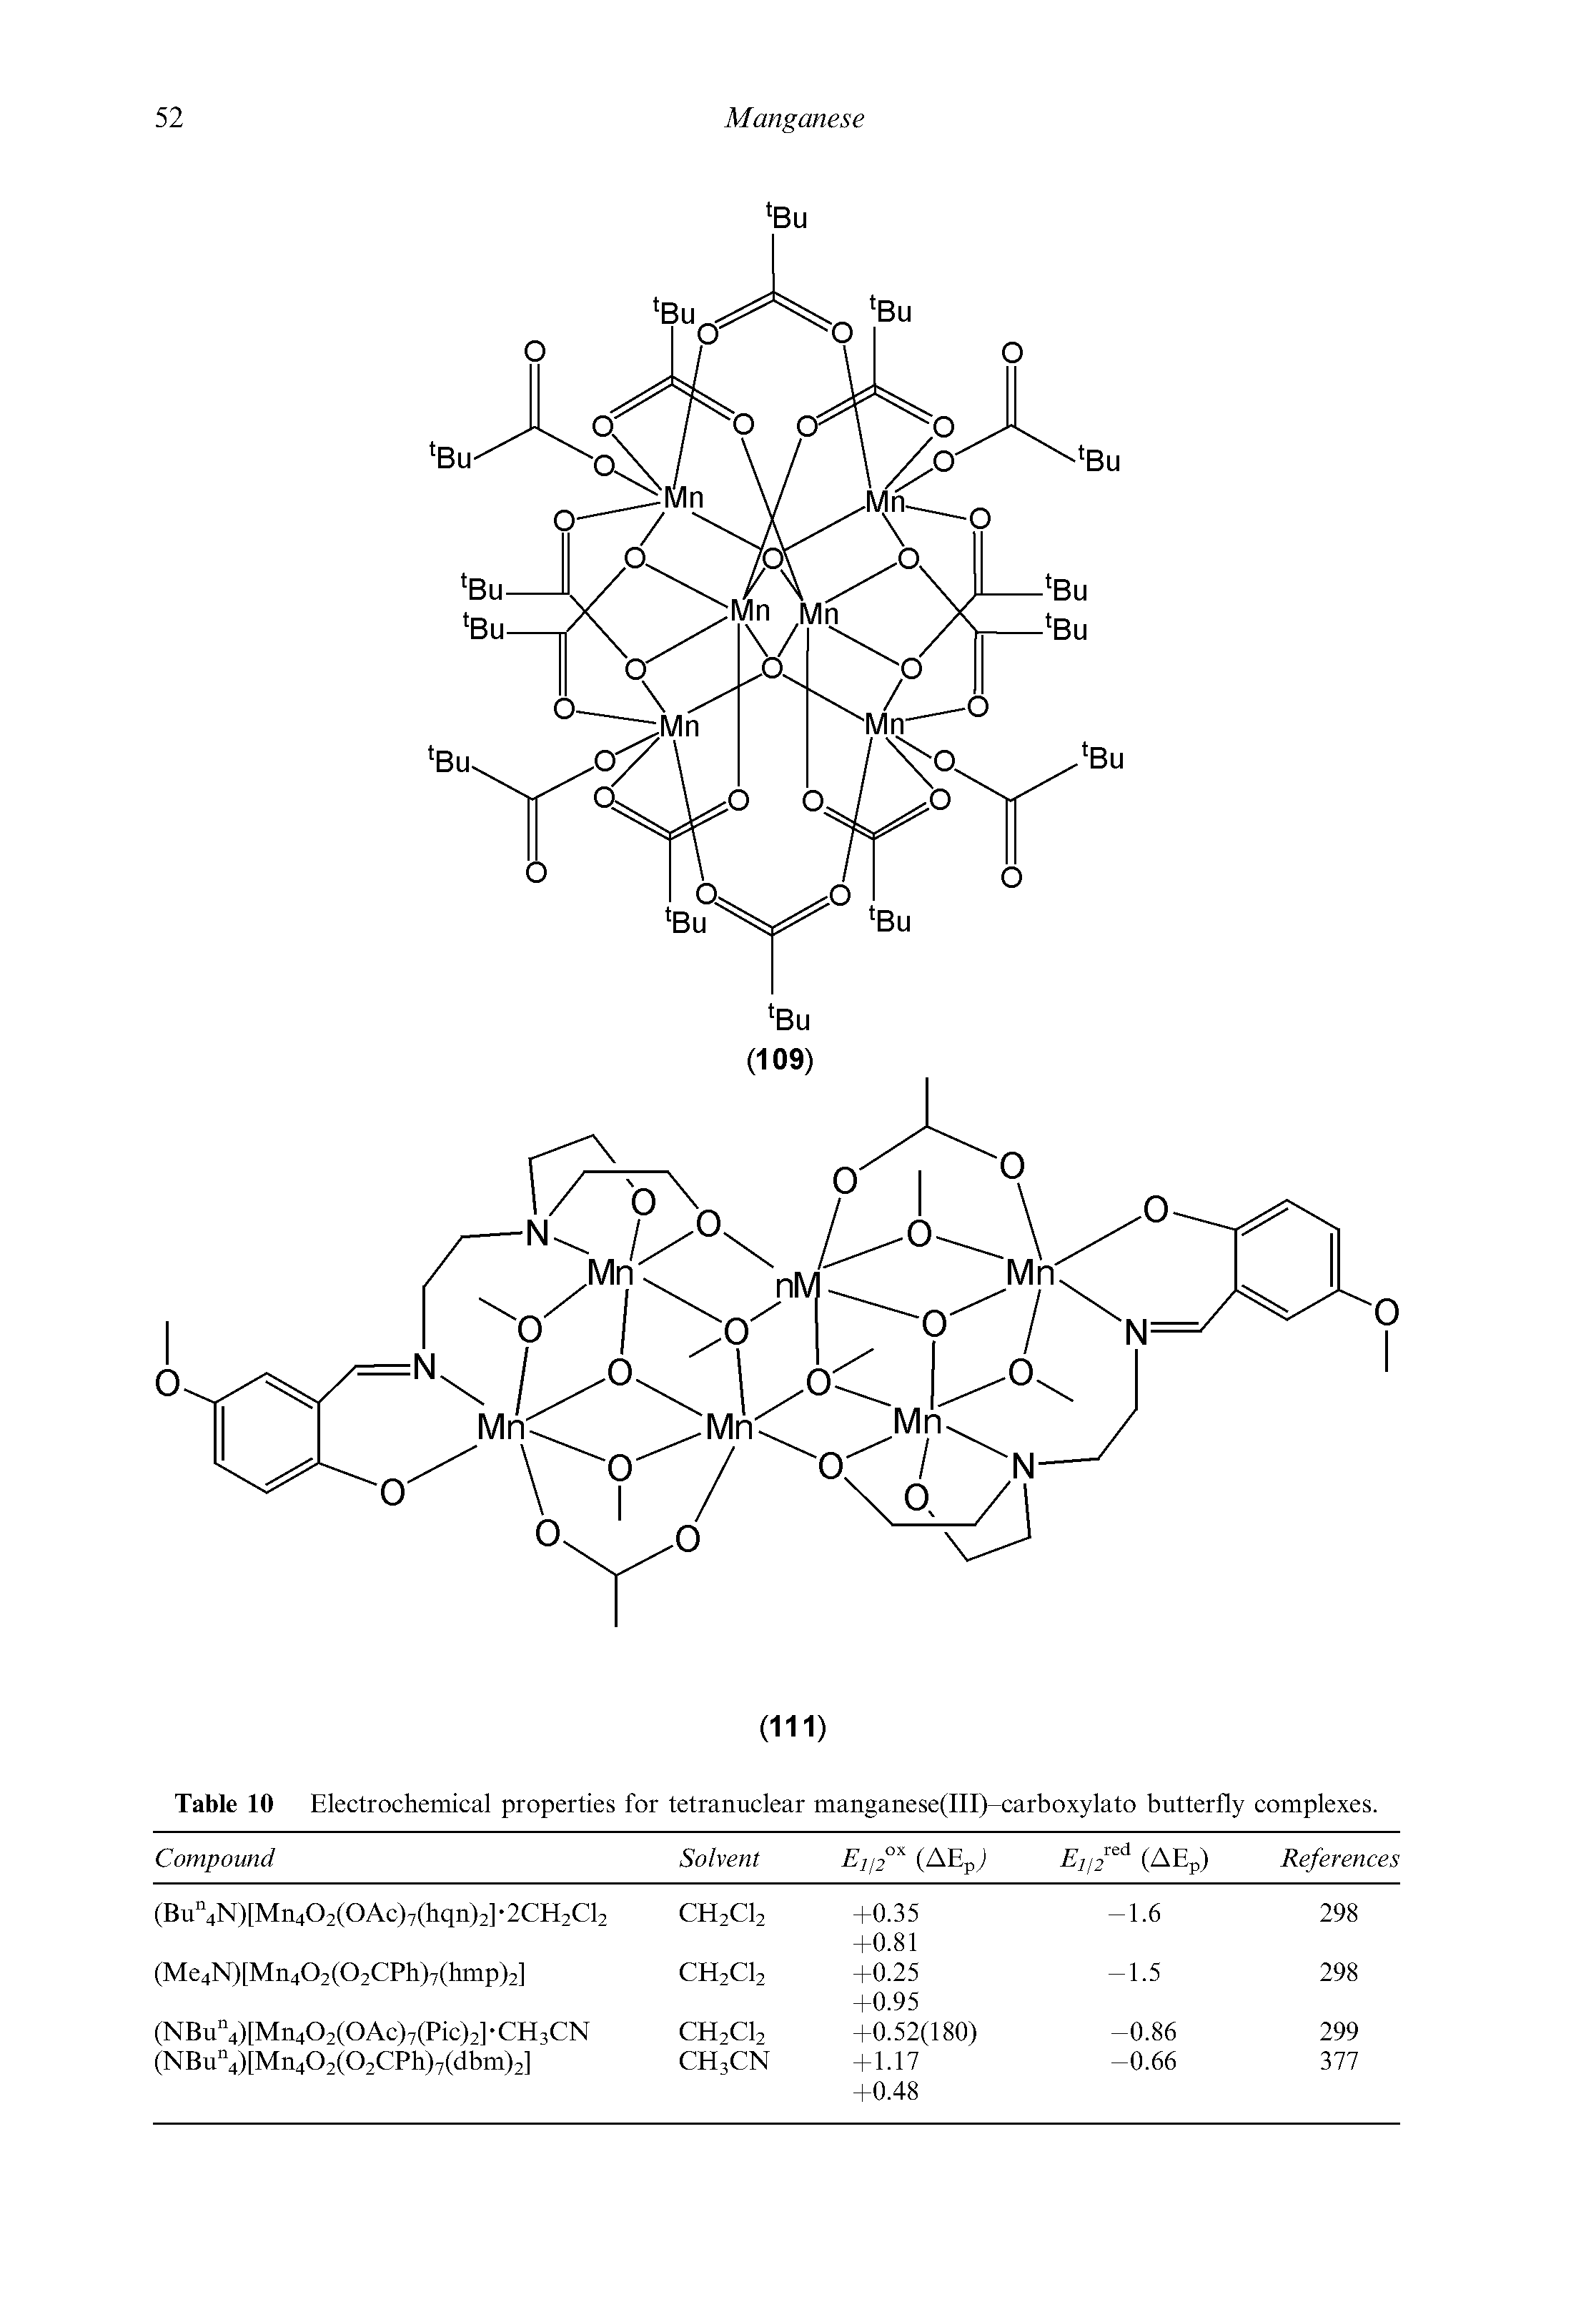 Table 10 Electrochemical properties for tetranuclear manganese(III)-carboxylato butterfly complexes.